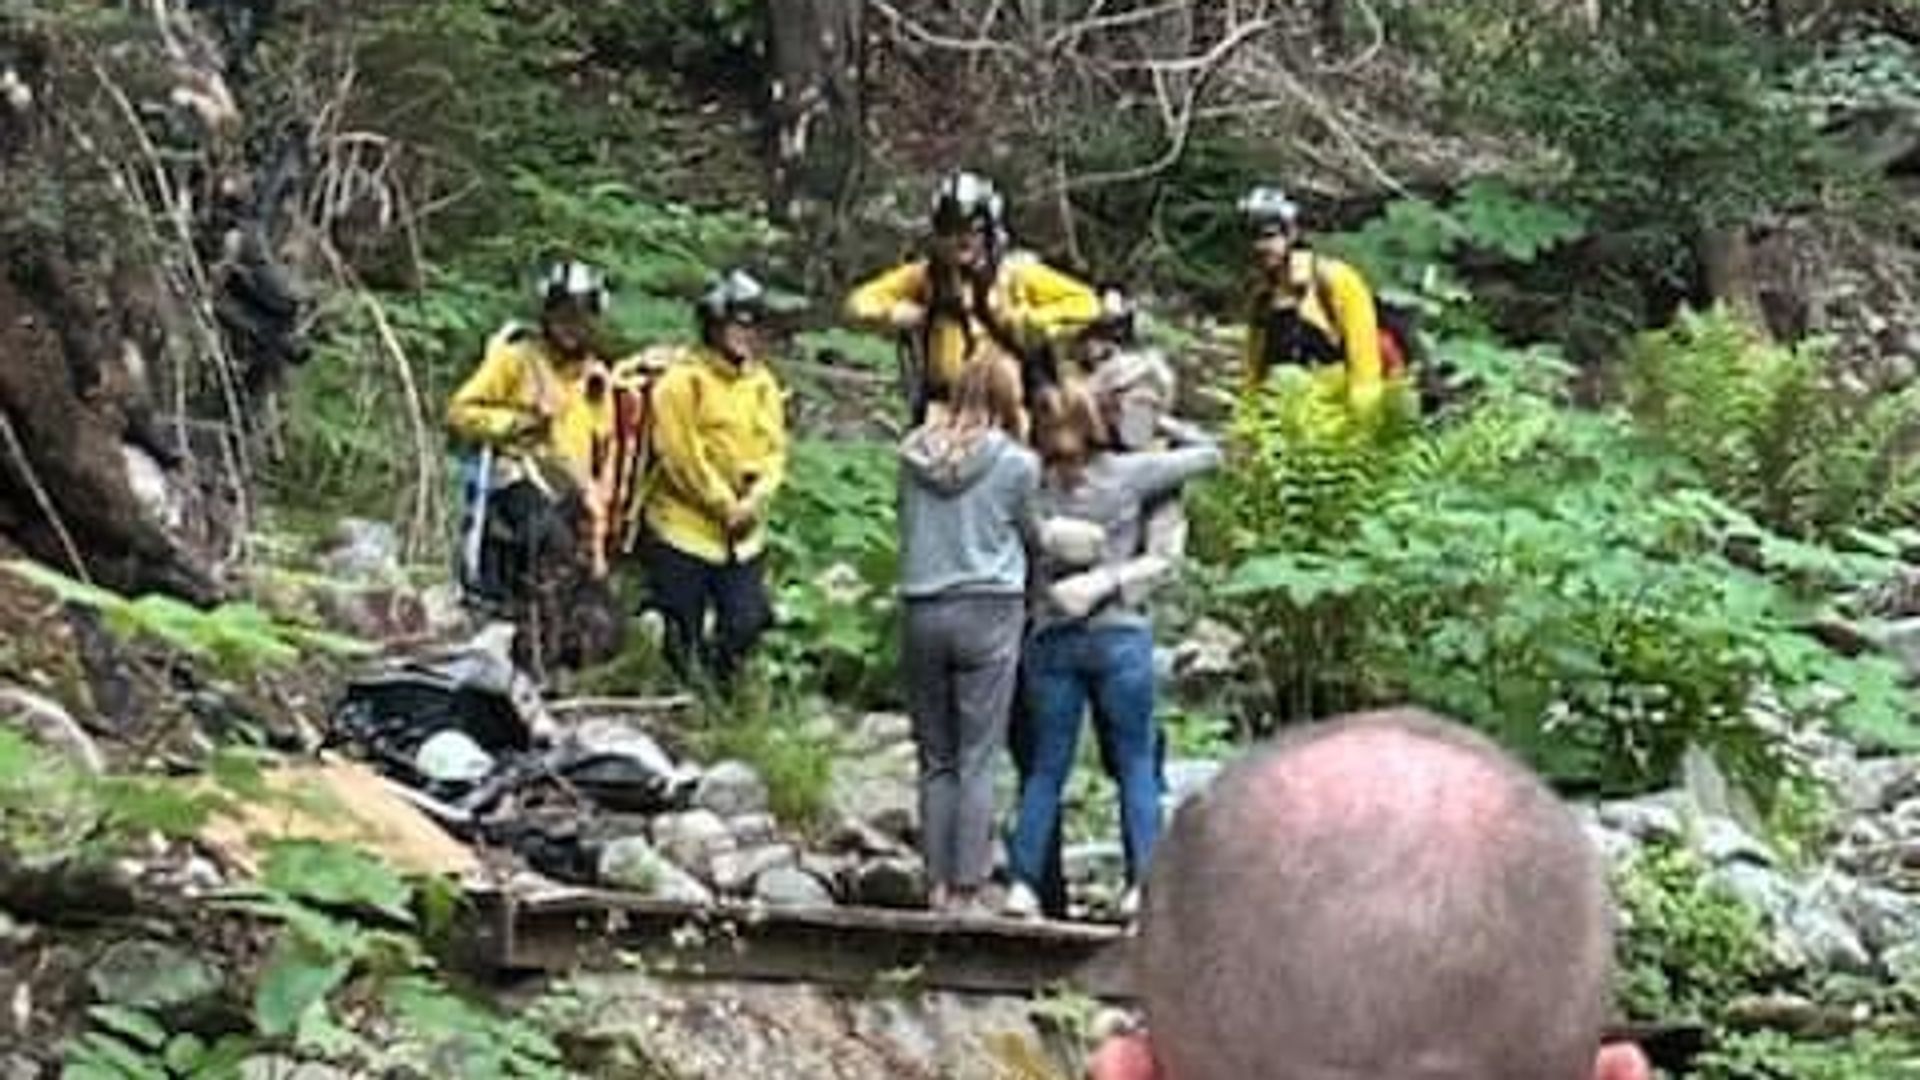 Man found after 10 days lost in woods tells how he survived as he was 'followed by mountain lion'